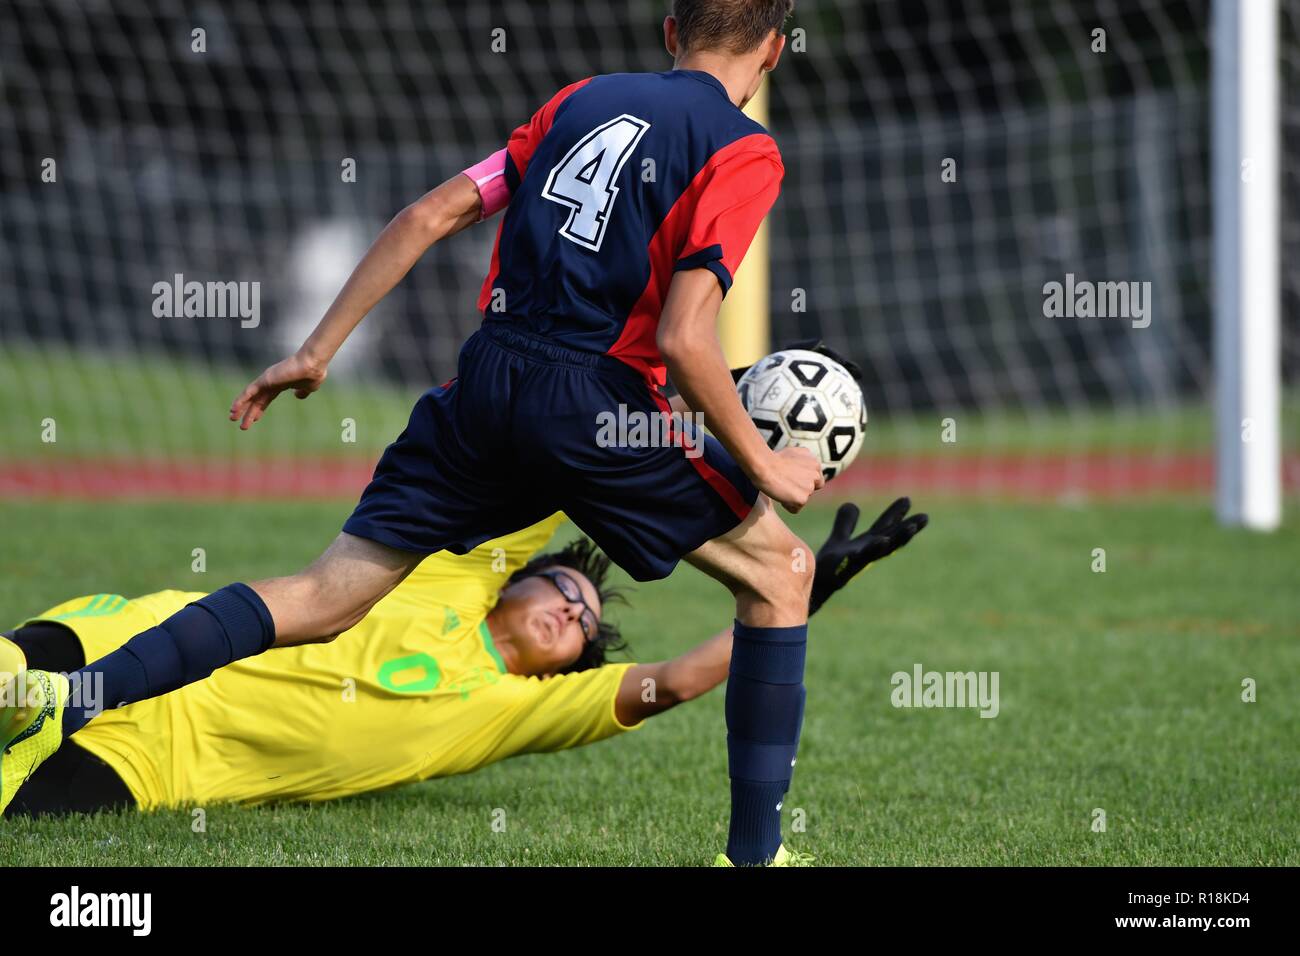 Keeper making a diving stop on a shot and preventing a rebound from a closing opposing forward. USA Stock Photo